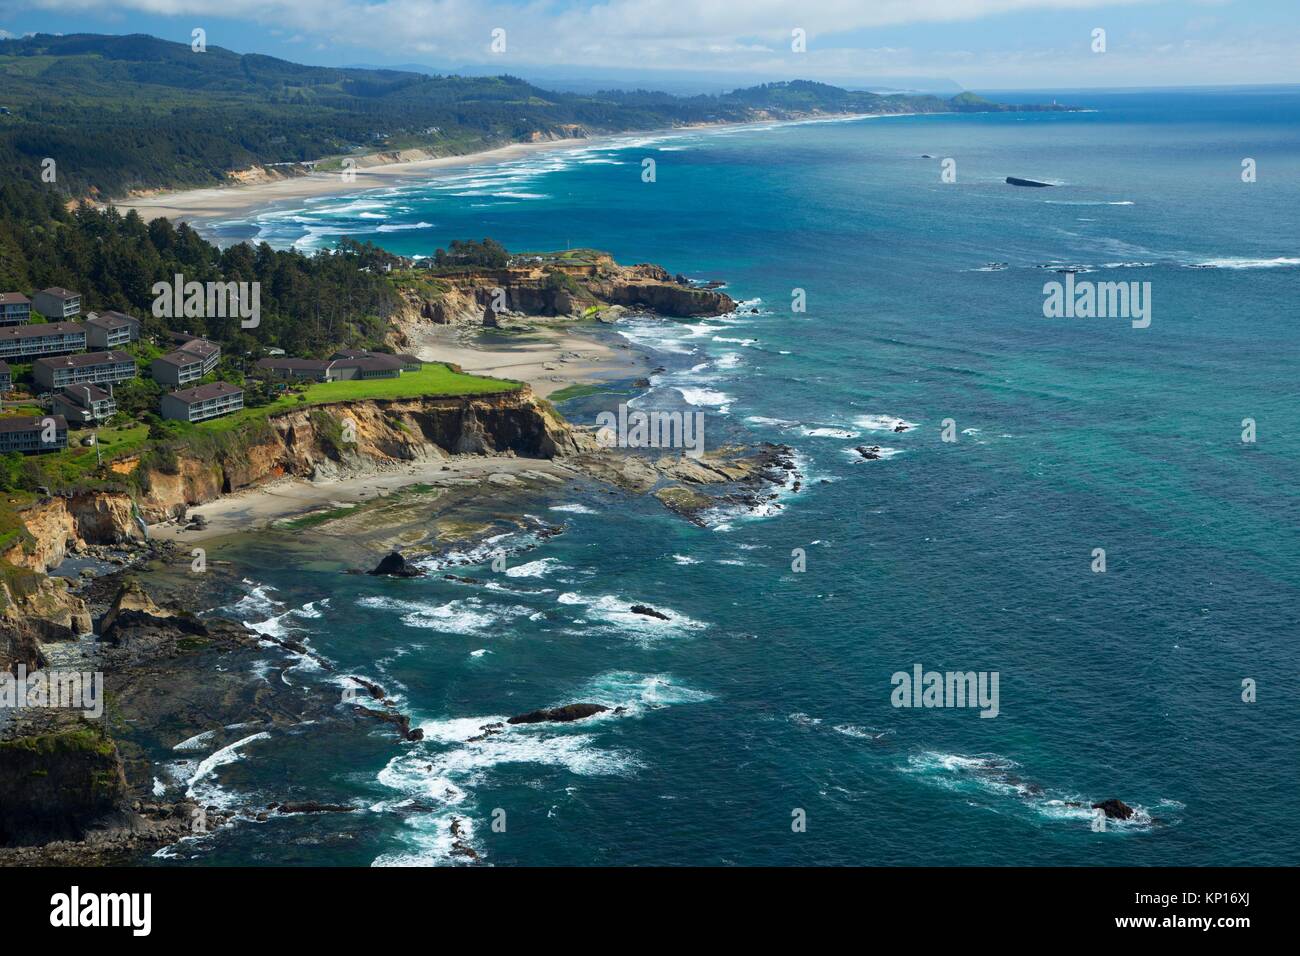 Otter Crest, Capo Foulweather parco statale, Oregon. Foto Stock